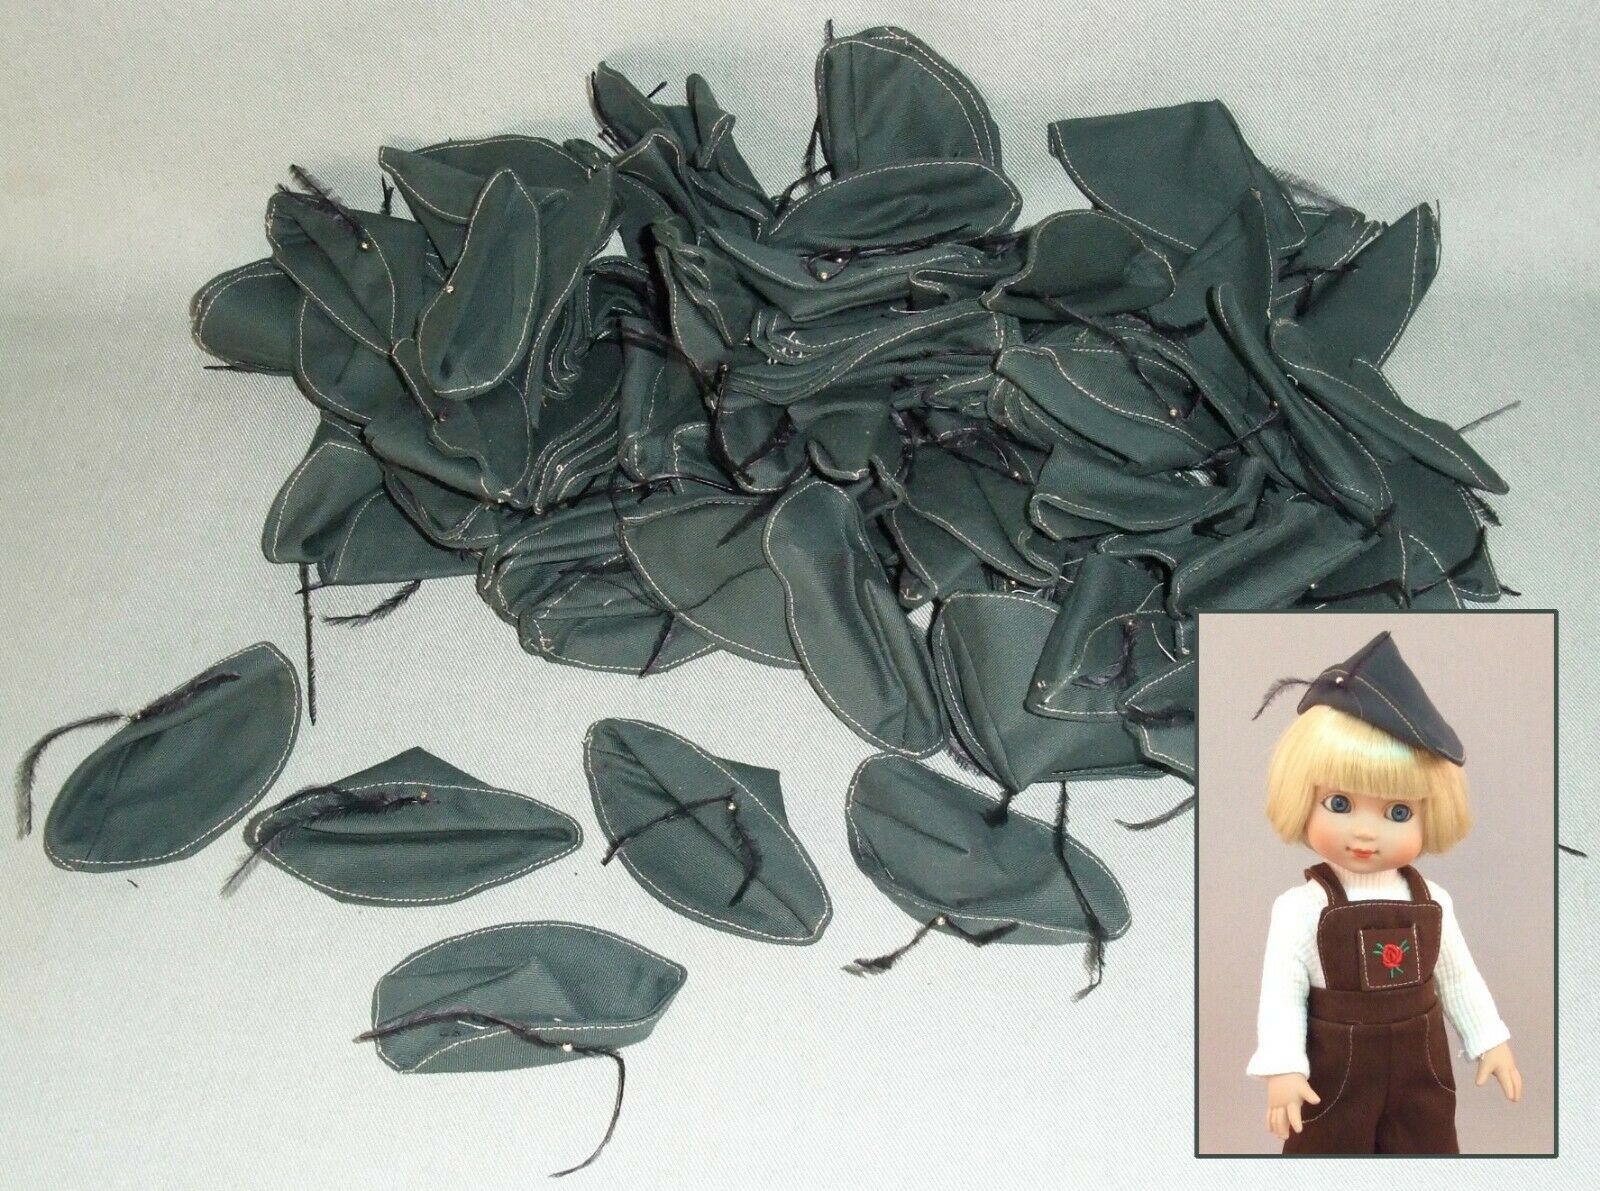 Robin Hood Hats For Small Dolls - Dozens Of Hats!! Wholesale Lot, Factory